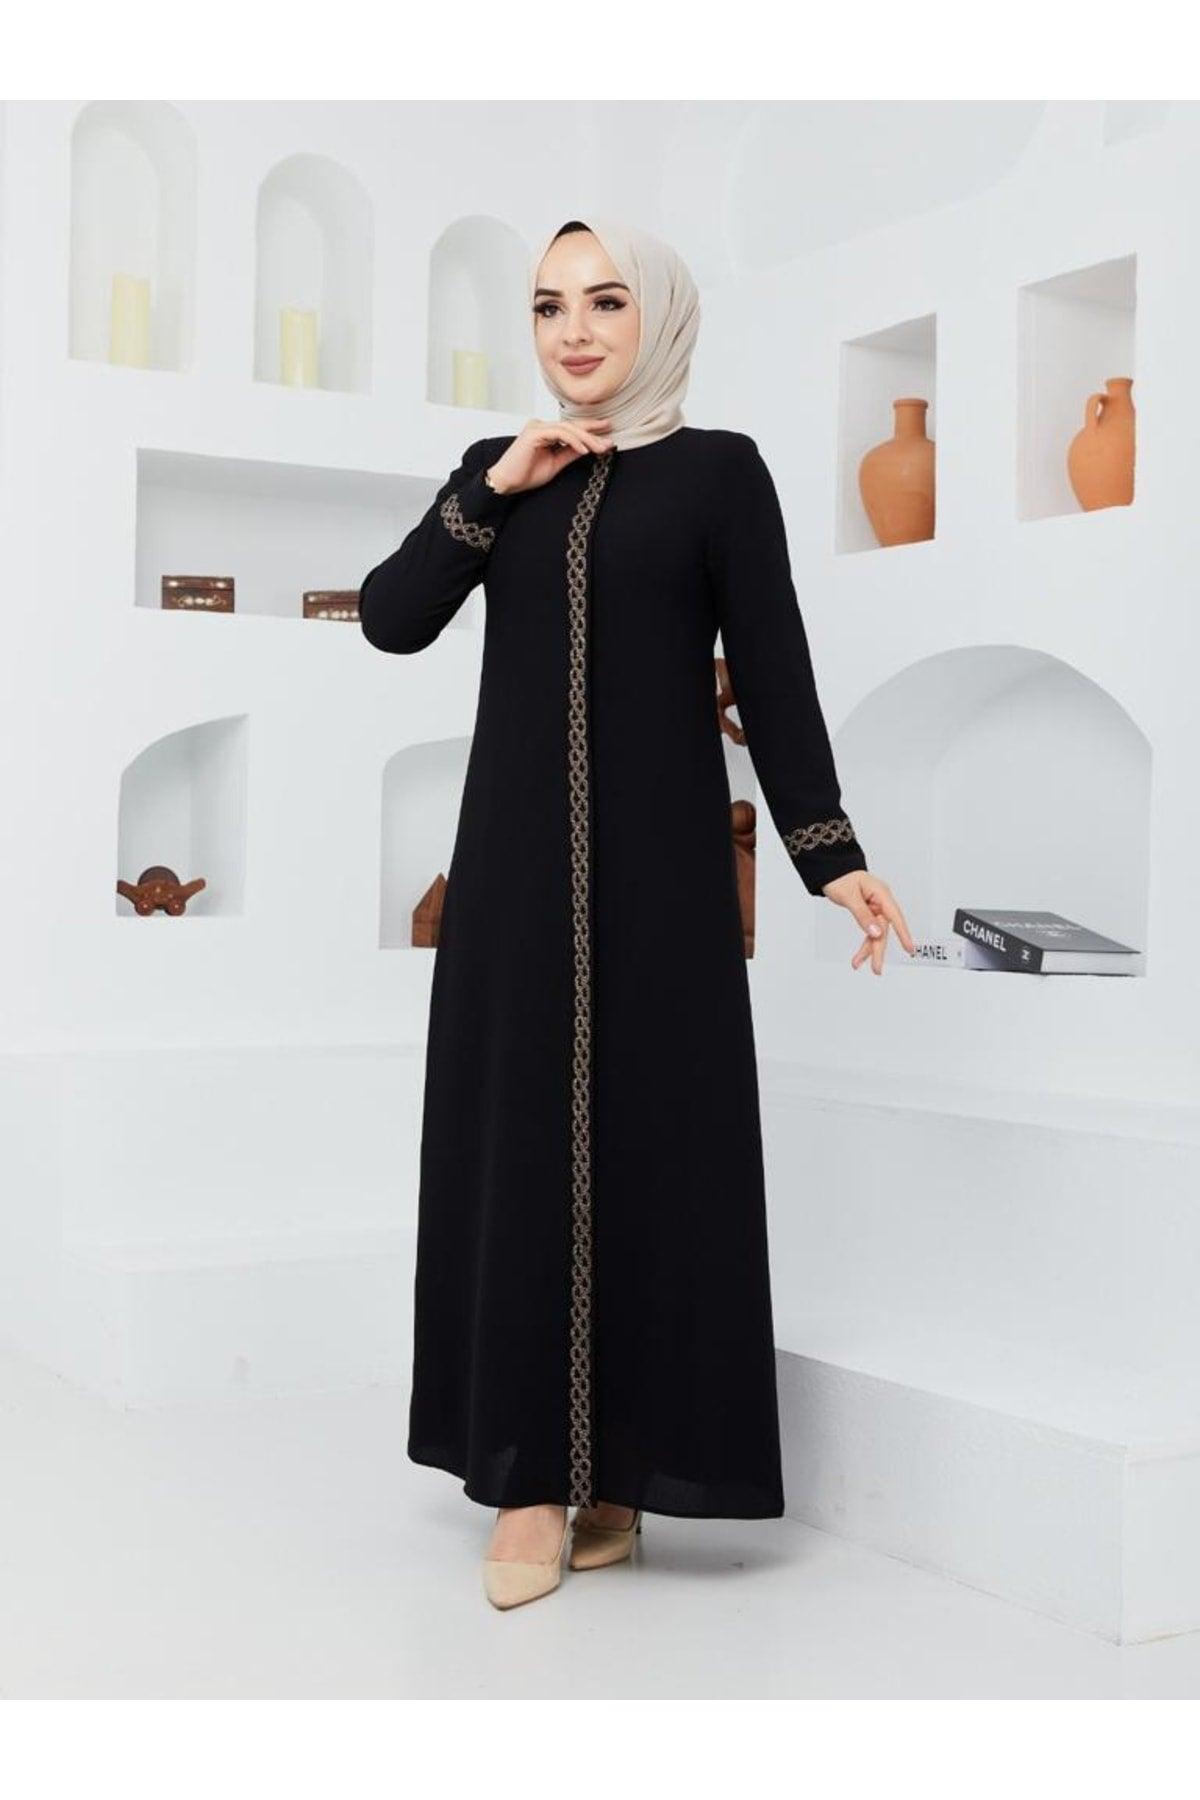 Stylish High Quality Elegant Abaya with Stone Embroidered Arms and Neck - Swordslife